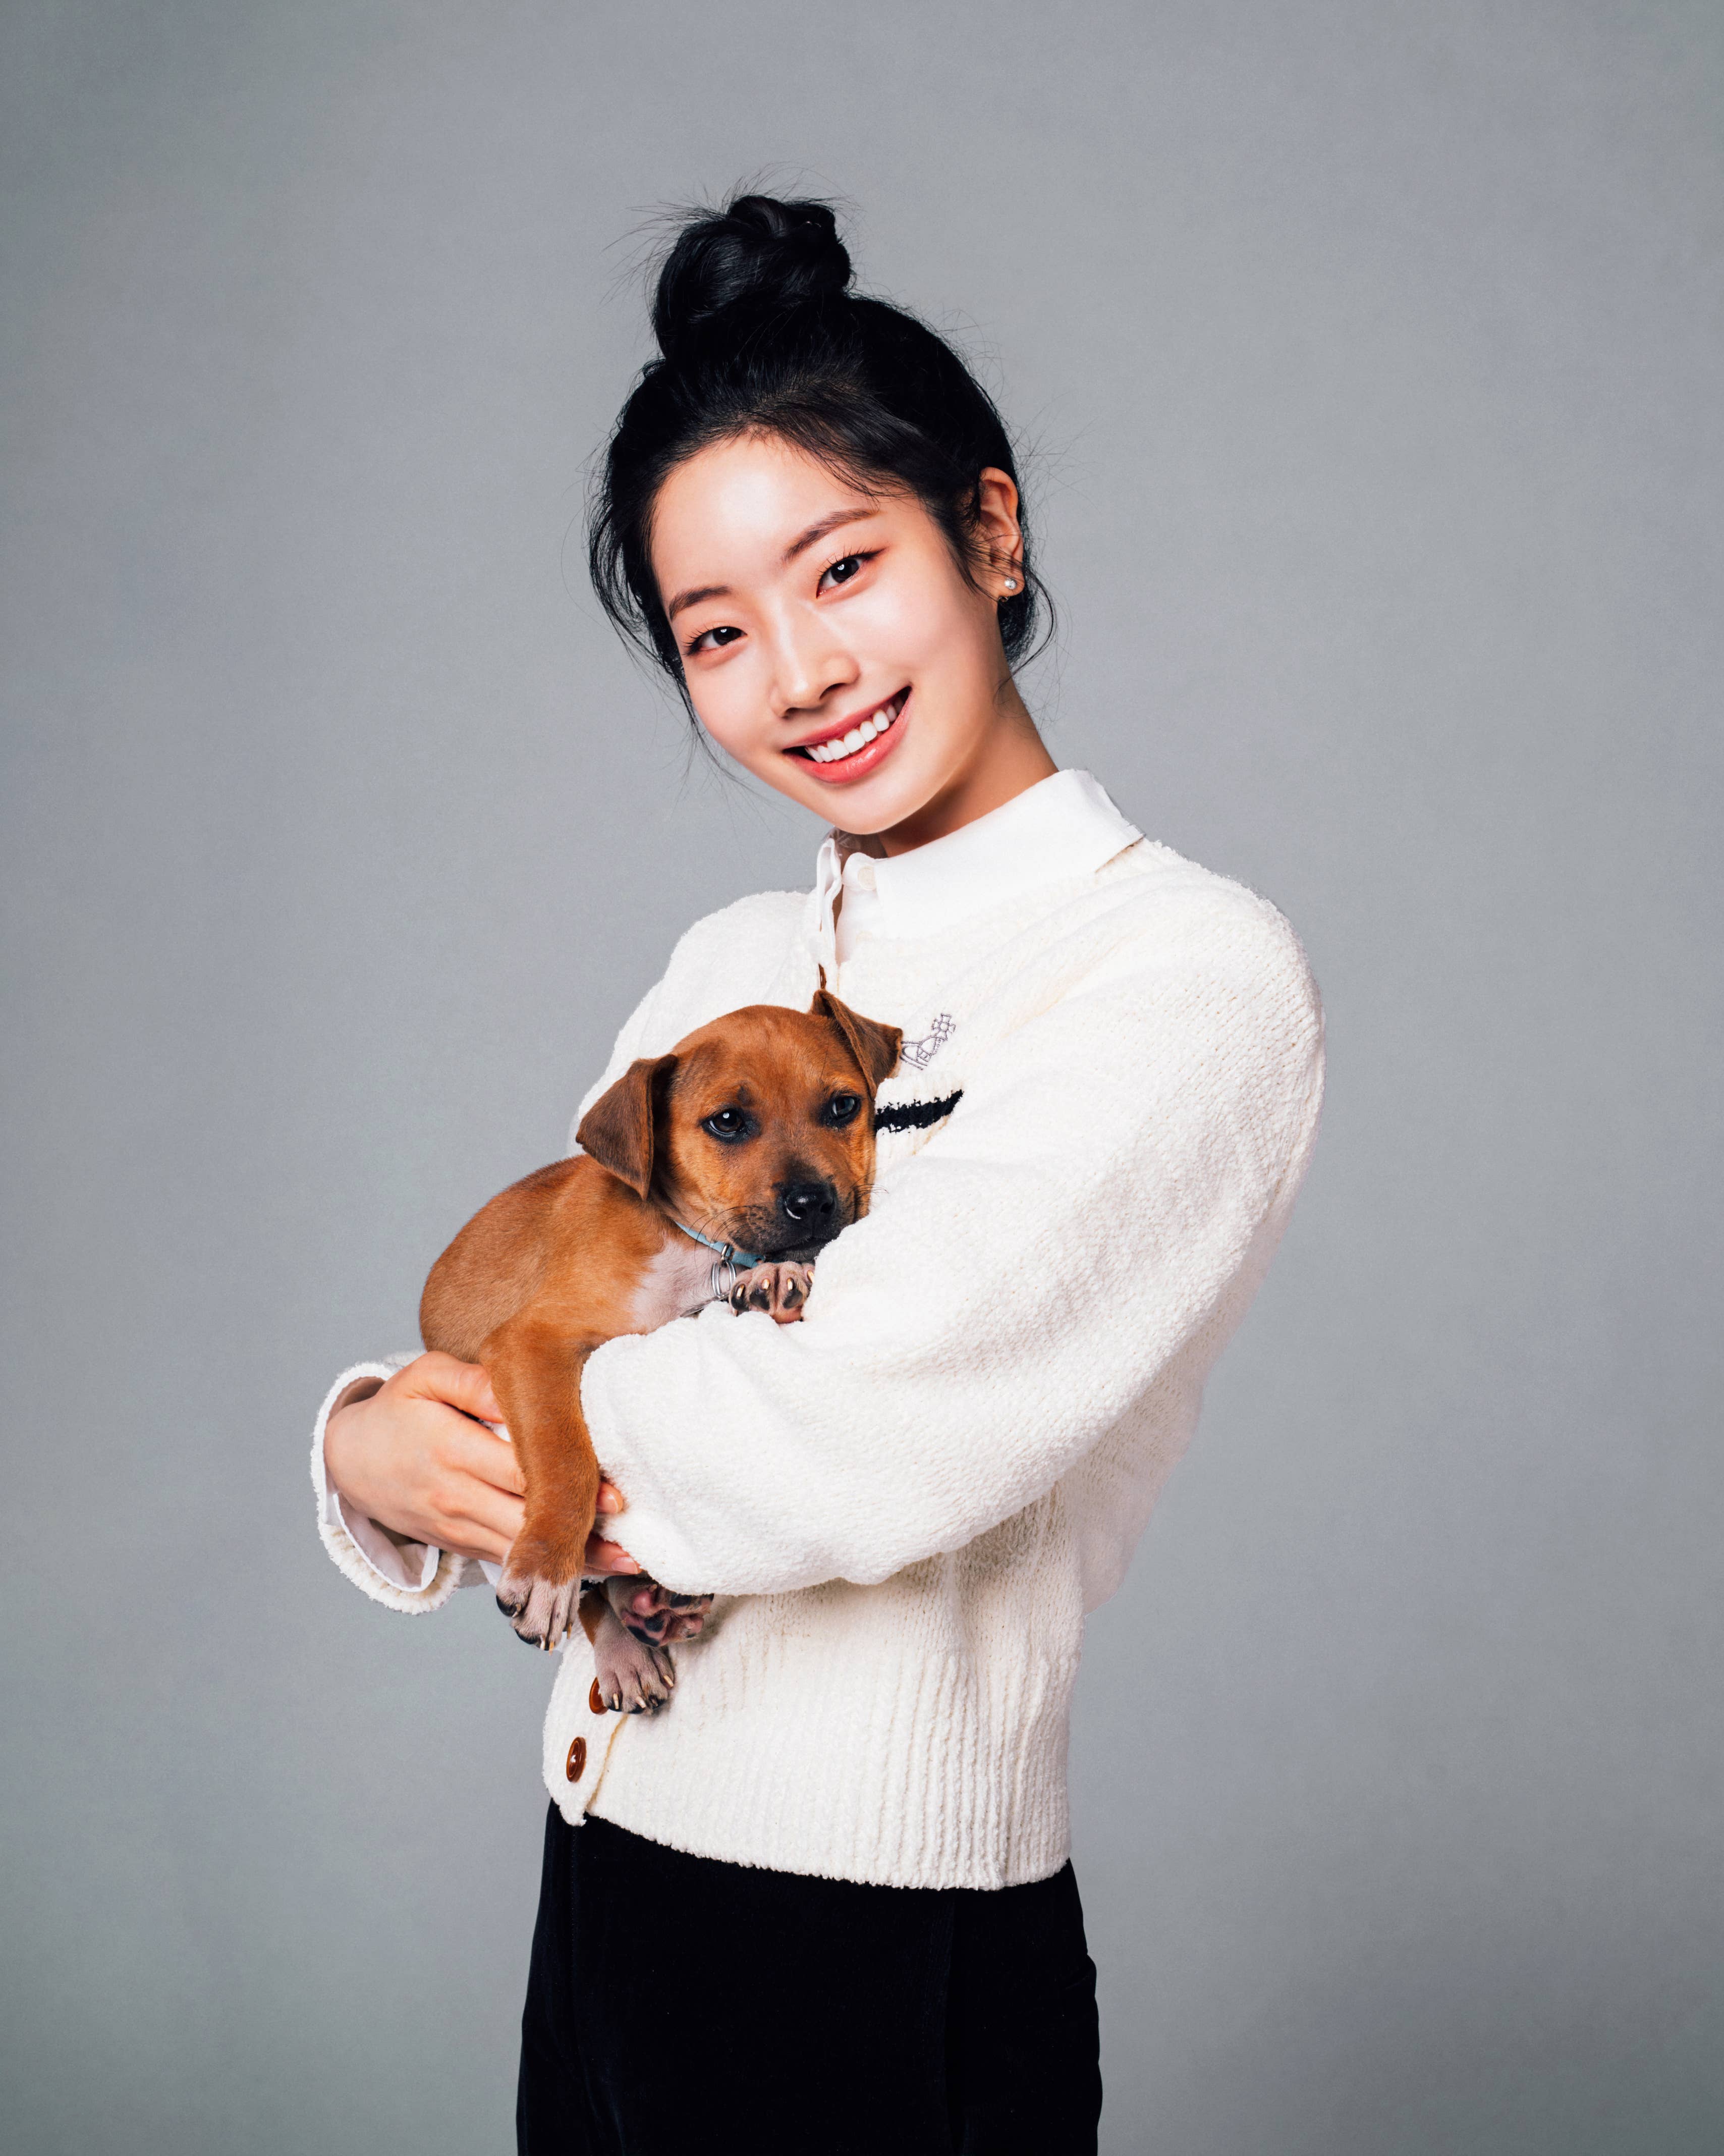 Woman smiling, holding a puppy, wearing a white top with a collar detail